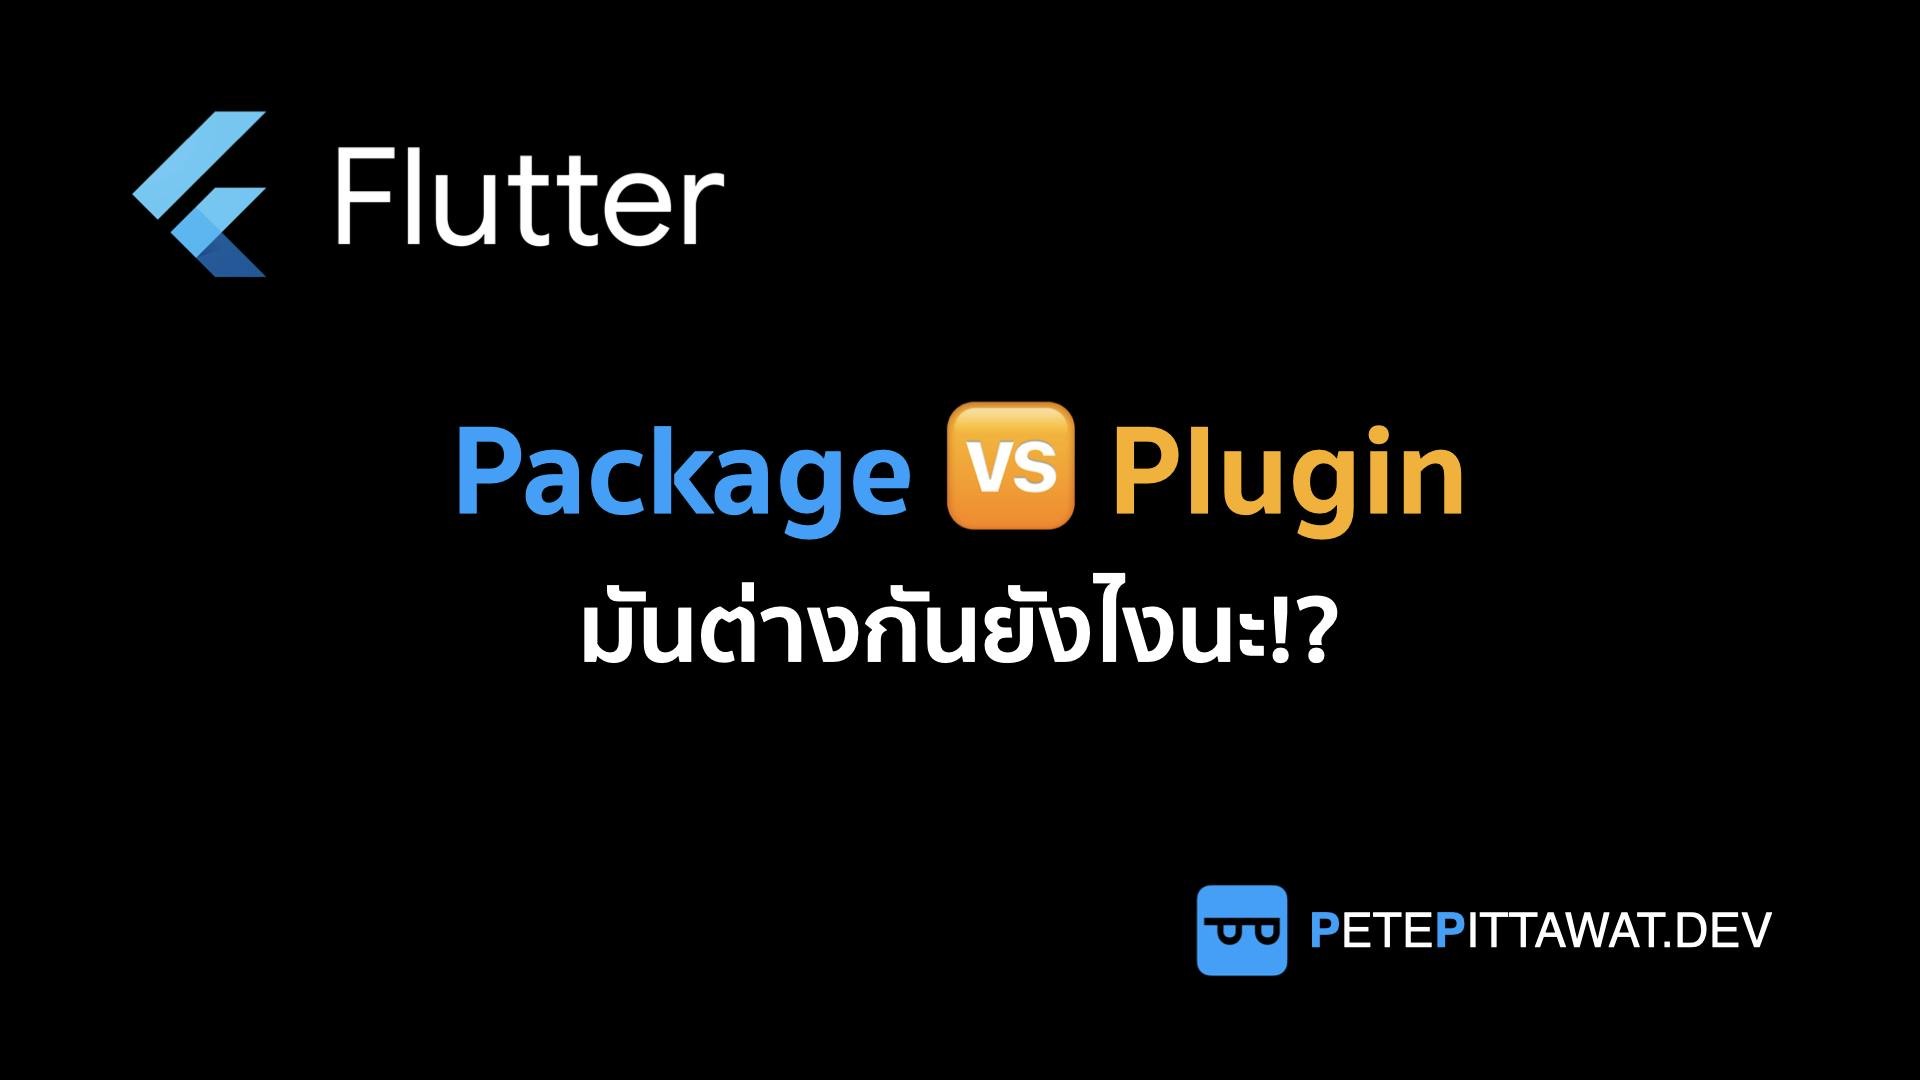 Cover Image for Flutter: Package กับ Plugin ต่างกันยังไงนะ?